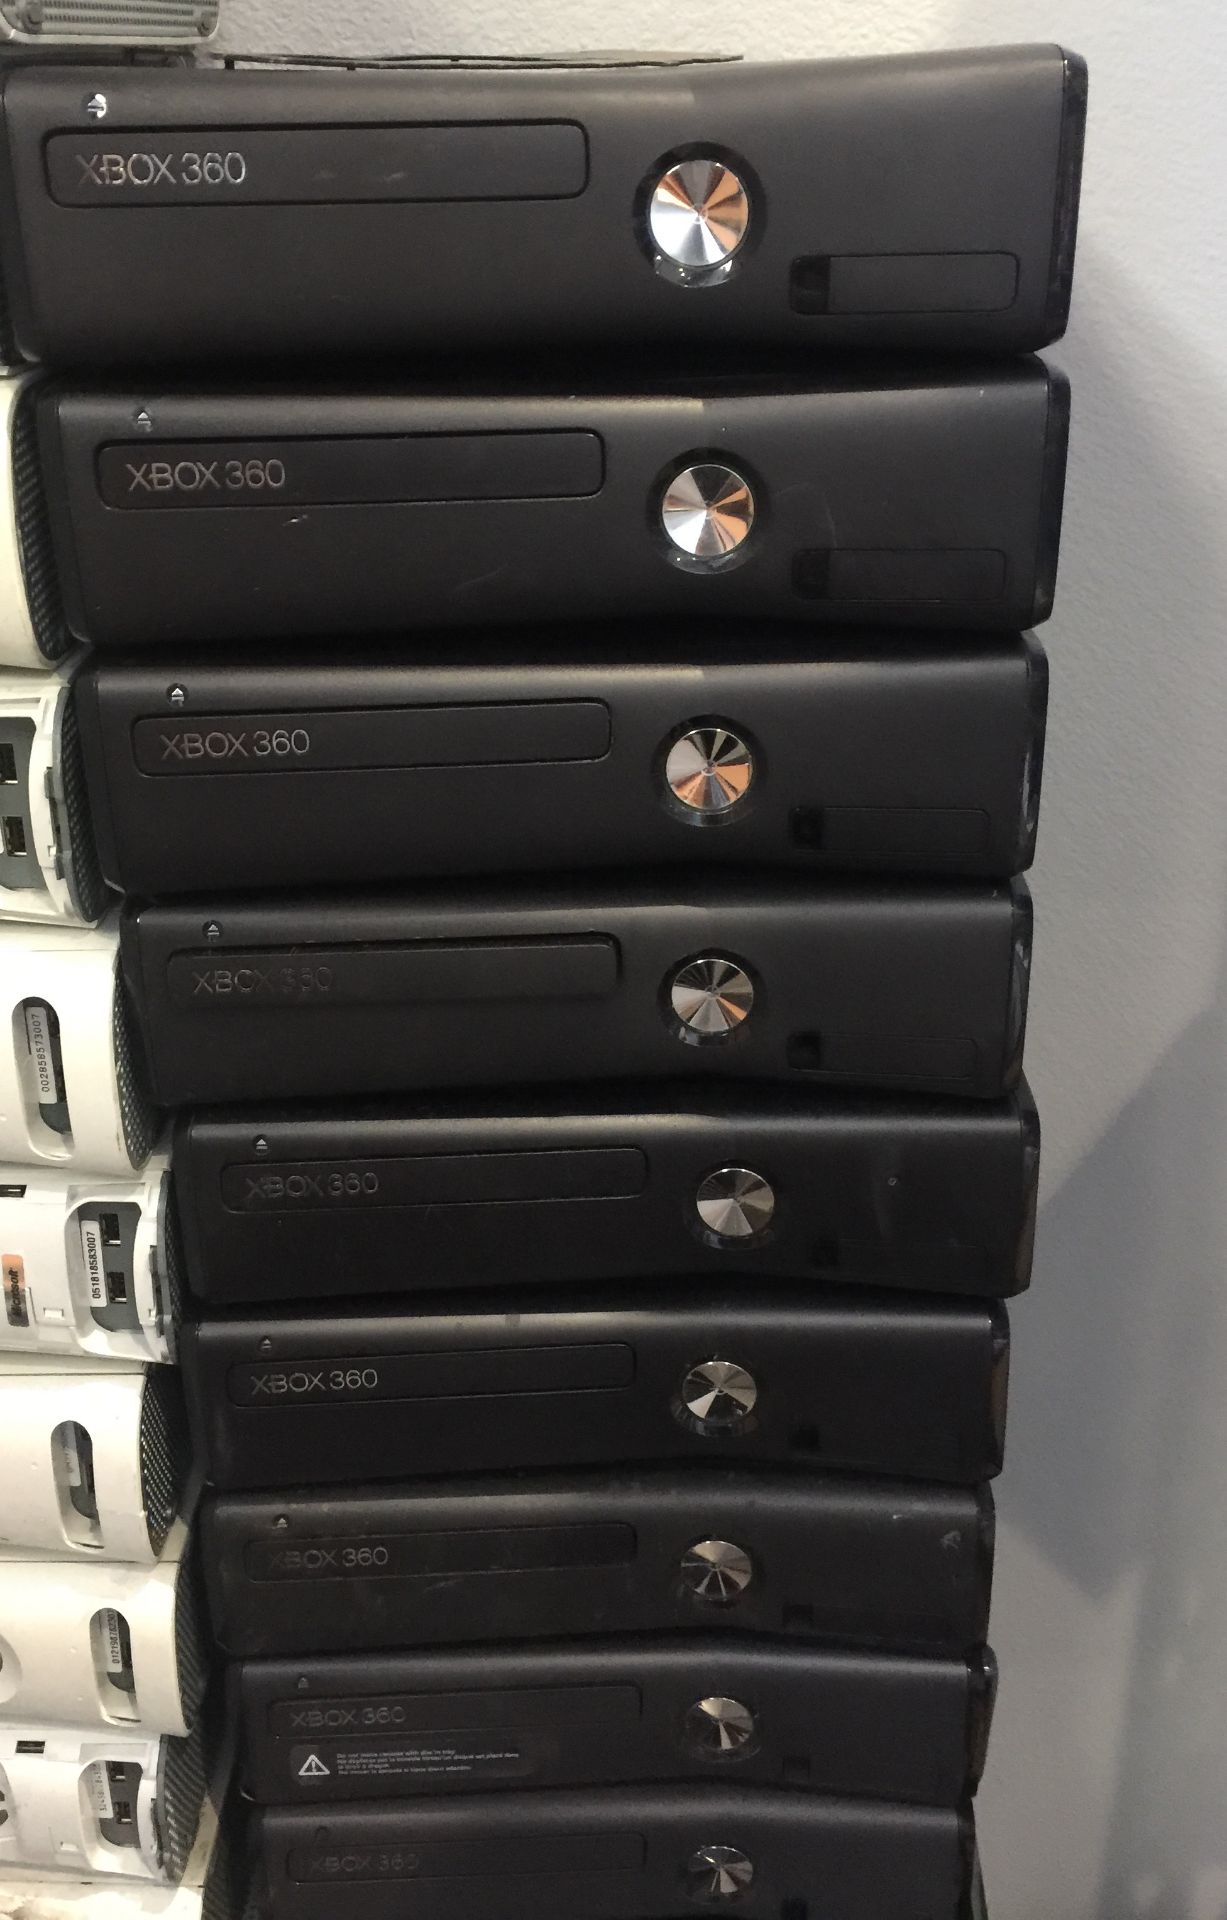 20 BLACK XBOX UNITS, NO IDEA OF CONDITION, SOLD AS IS